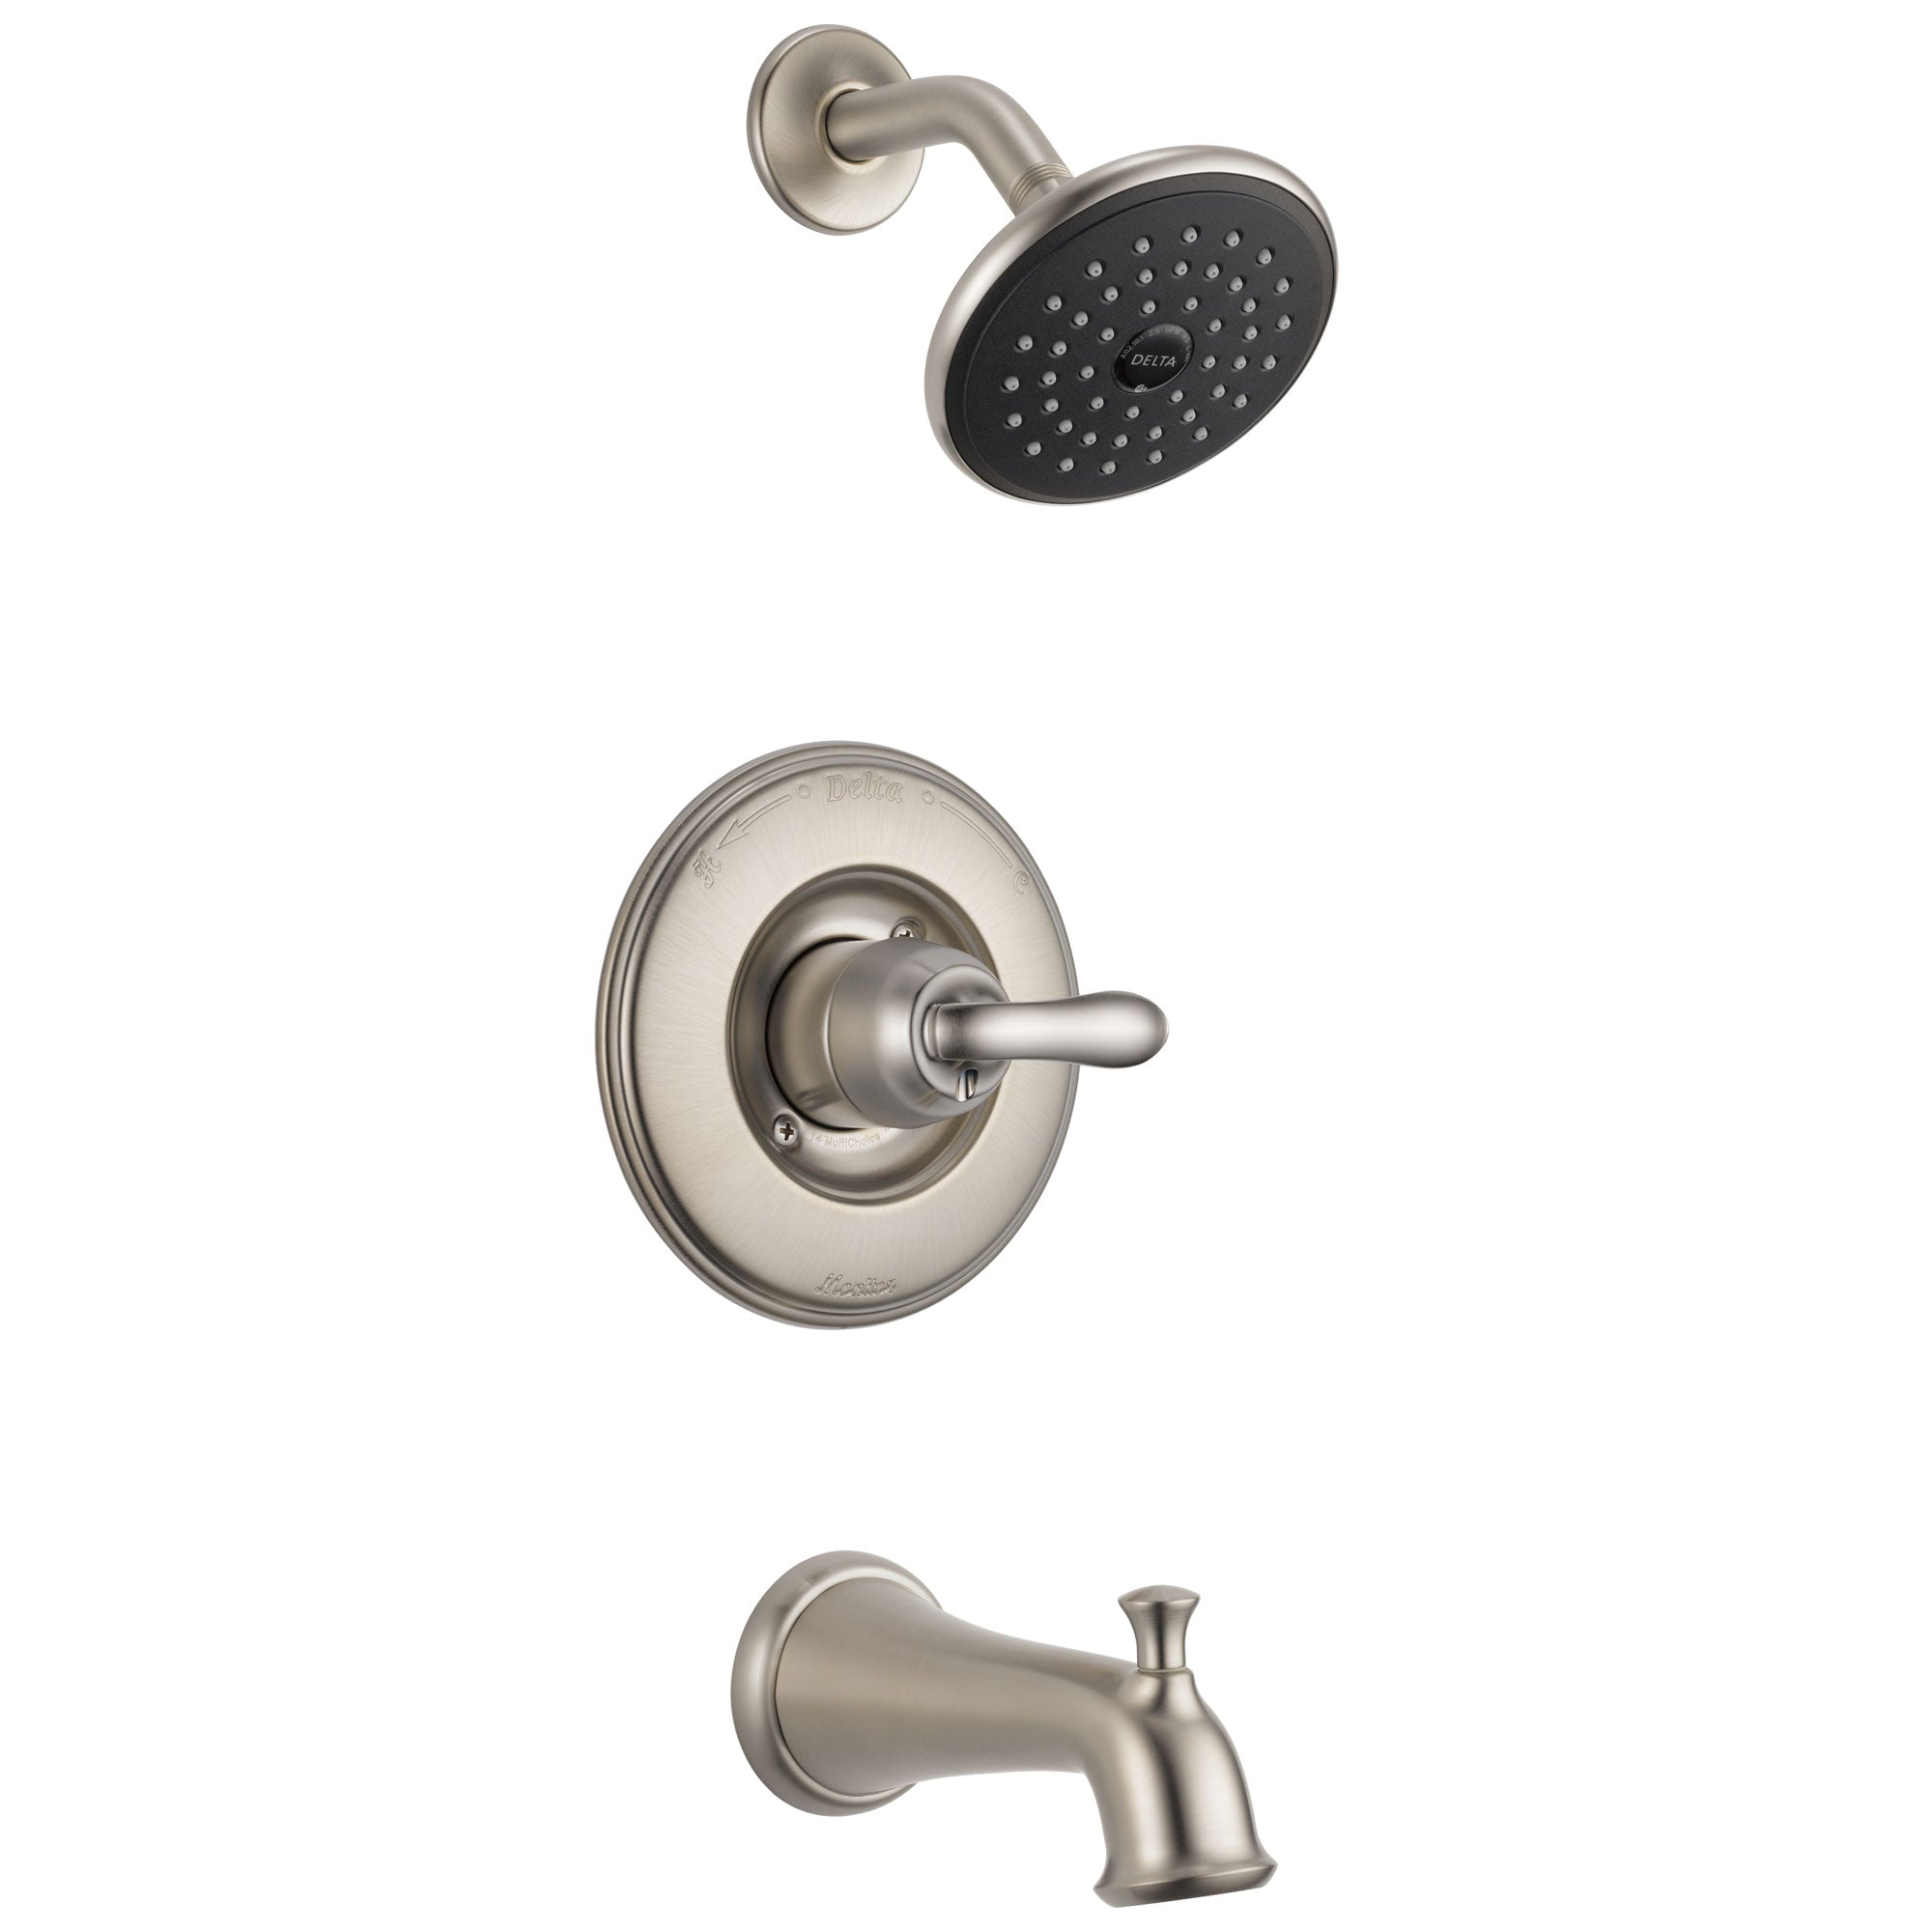 Delta Linden Collection Stainless Steel Finish Monitor 14 Series Tub and Shower Combo Faucet Trim Kit (Requires Valve) DT14494SSSOS